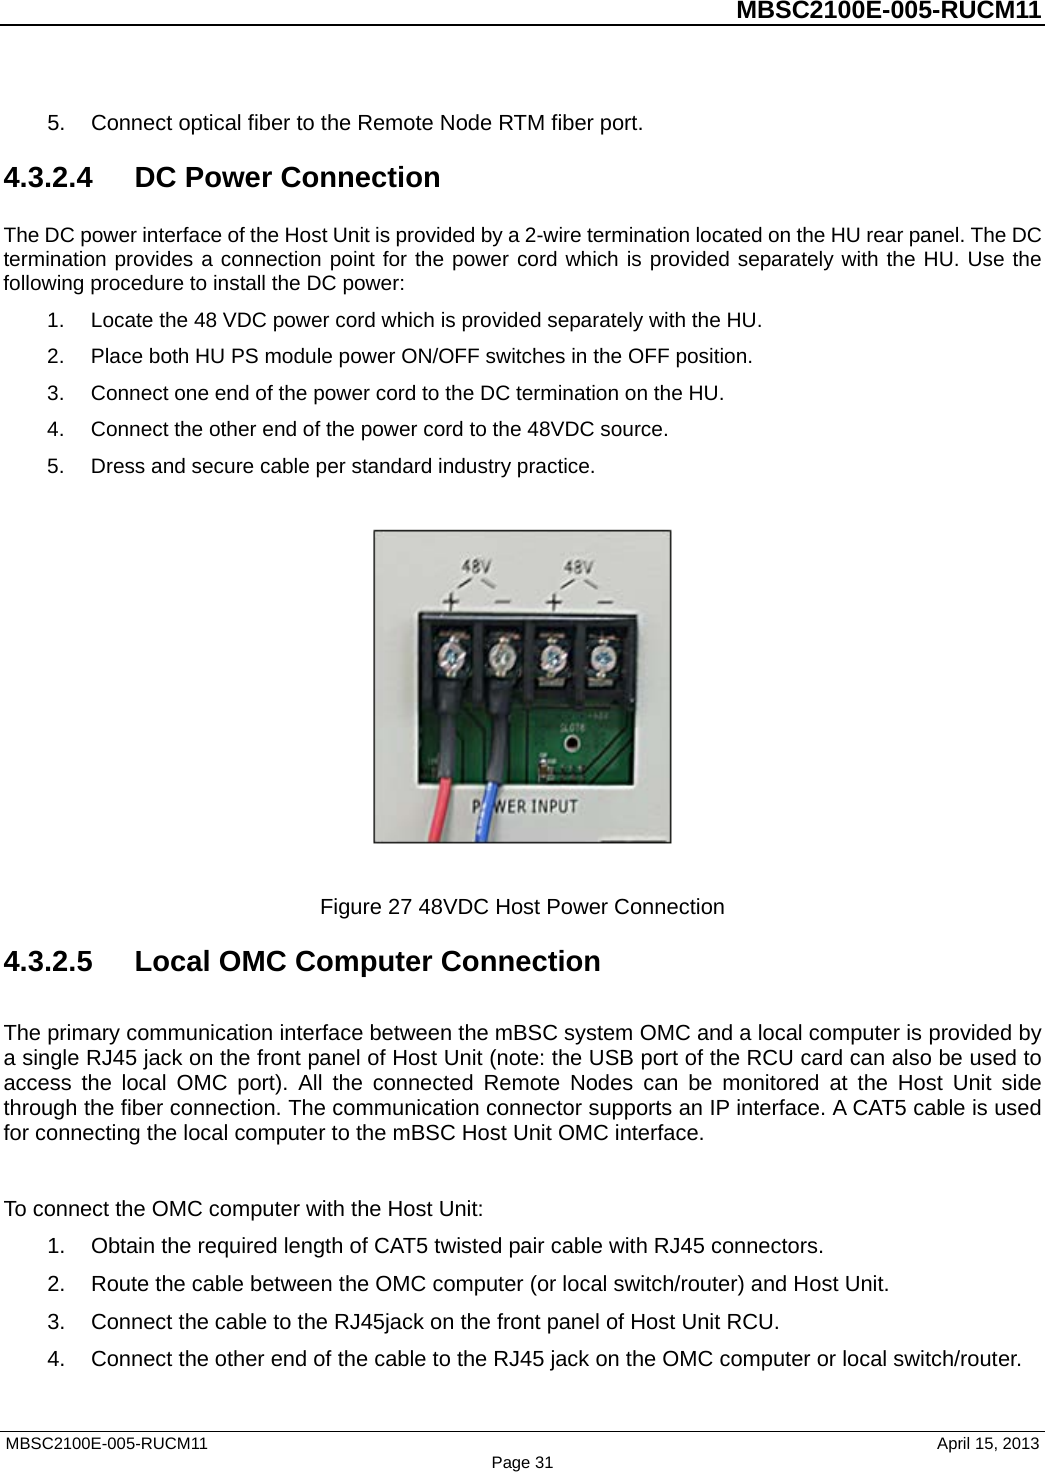          MBSC2100E-005-RUCM11   5. Connect optical fiber to the Remote Node RTM fiber port. 4.3.2.4  DC Power Connection The DC power interface of the Host Unit is provided by a 2-wire termination located on the HU rear panel. The DC termination provides a connection point for the power cord which is provided separately with the HU. Use the following procedure to install the DC power: 1. Locate the 48 VDC power cord which is provided separately with the HU.   2. Place both HU PS module power ON/OFF switches in the OFF position. 3. Connect one end of the power cord to the DC termination on the HU. 4. Connect the other end of the power cord to the 48VDC source. 5. Dress and secure cable per standard industry practice.    Figure 27 48VDC Host Power Connection 4.3.2.5 Local OMC Computer Connection The primary communication interface between the mBSC system OMC and a local computer is provided by a single RJ45 jack on the front panel of Host Unit (note: the USB port of the RCU card can also be used to access the local OMC port). All the connected Remote Nodes can be monitored at the Host Unit side through the fiber connection. The communication connector supports an IP interface. A CAT5 cable is used for connecting the local computer to the mBSC Host Unit OMC interface.  To connect the OMC computer with the Host Unit: 1. Obtain the required length of CAT5 twisted pair cable with RJ45 connectors. 2. Route the cable between the OMC computer (or local switch/router) and Host Unit. 3. Connect the cable to the RJ45jack on the front panel of Host Unit RCU. 4. Connect the other end of the cable to the RJ45 jack on the OMC computer or local switch/router. MBSC2100E-005-RUCM11                                April 15, 2013 Page 31 